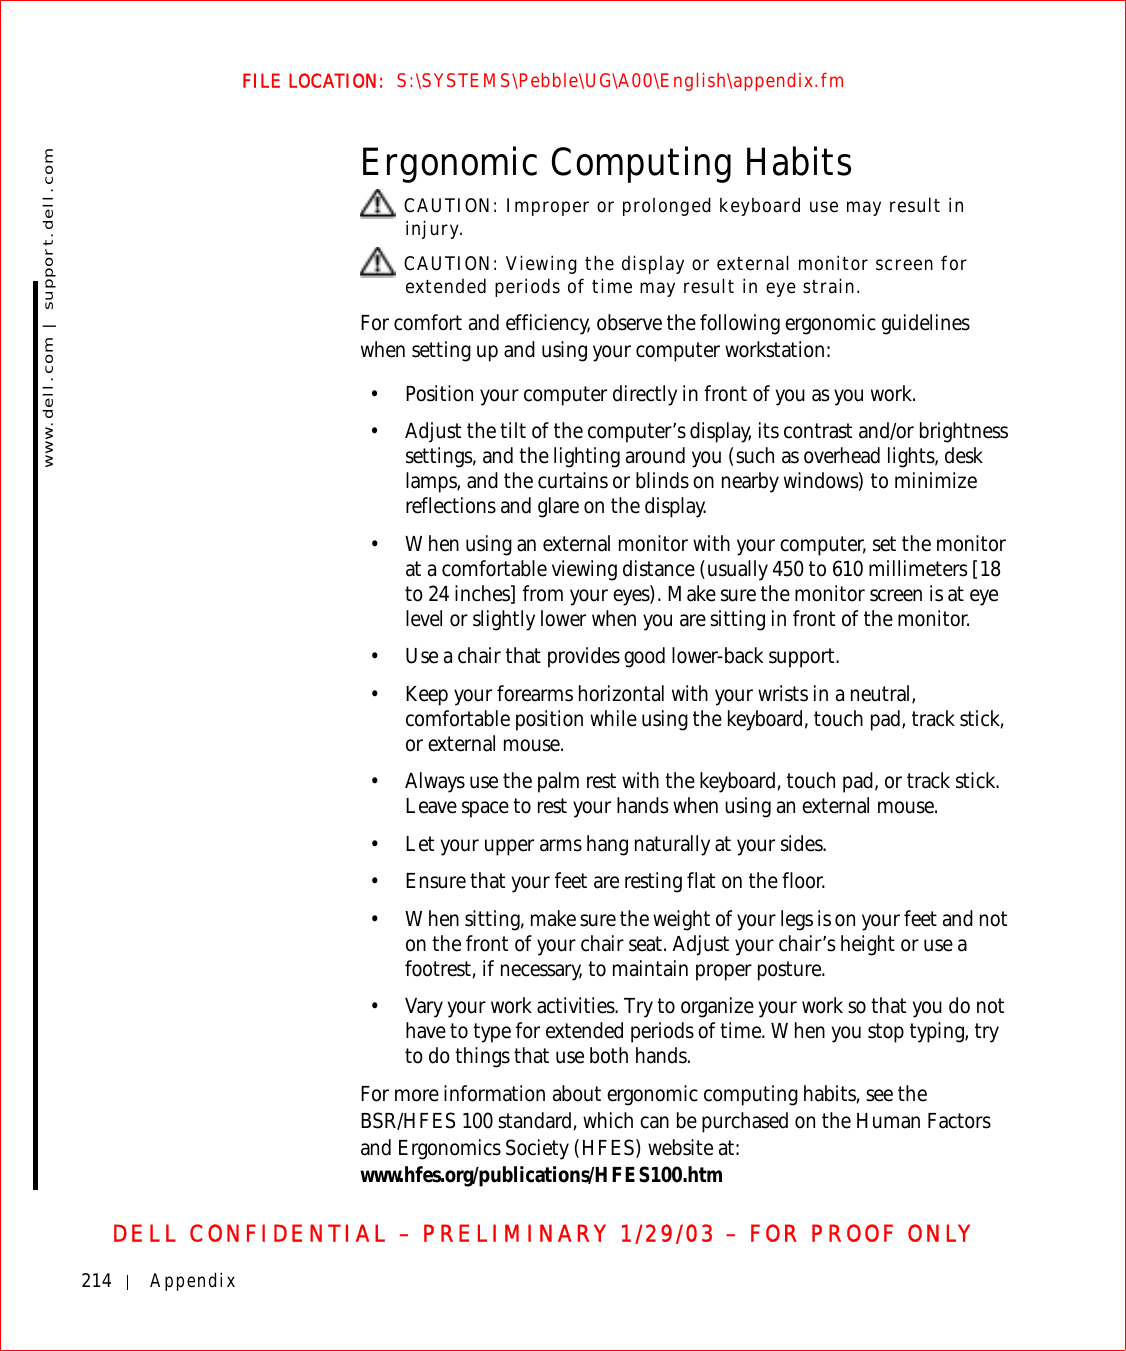 214 Appendixwww.dell.com | support.dell.comFILE LOCATION:  S:\SYSTEMS\Pebble\UG\A00\English\appendix.fmDELL CONFIDENTIAL – PRELIMINARY 1/29/03 – FOR PROOF ONLYErgonomic Computing Habits CAUTION: Improper or prolonged keyboard use may result in injury. CAUTION: Viewing the display or external monitor screen for extended periods of time may result in eye strain.For comfort and efficiency, observe the following ergonomic guidelines when setting up and using your computer workstation:• Position your computer directly in front of you as you work.• Adjust the tilt of the computer’s display, its contrast and/or brightness settings, and the lighting around you (such as overhead lights, desk lamps, and the curtains or blinds on nearby windows) to minimize reflections and glare on the display.• When using an external monitor with your computer, set the monitor at a comfortable viewing distance (usually 450 to 610 millimeters [18 to 24 inches] from your eyes). Make sure the monitor screen is at eye level or slightly lower when you are sitting in front of the monitor. • Use a chair that provides good lower-back support.• Keep your forearms horizontal with your wrists in a neutral, comfortable position while using the keyboard, touch pad, track stick, or external mouse.• Always use the palm rest with the keyboard, touch pad, or track stick. Leave space to rest your hands when using an external mouse.• Let your upper arms hang naturally at your sides.• Ensure that your feet are resting flat on the floor.• When sitting, make sure the weight of your legs is on your feet and not on the front of your chair seat. Adjust your chair’s height or use a footrest, if necessary, to maintain proper posture.• Vary your work activities. Try to organize your work so that you do not have to type for extended periods of time. When you stop typing, try to do things that use both hands. For more information about ergonomic computing habits, see the BSR/HFES 100 standard, which can be purchased on the Human Factors and Ergonomics Society (HFES) website at: www.hfes.org/publications/HFES100.htm